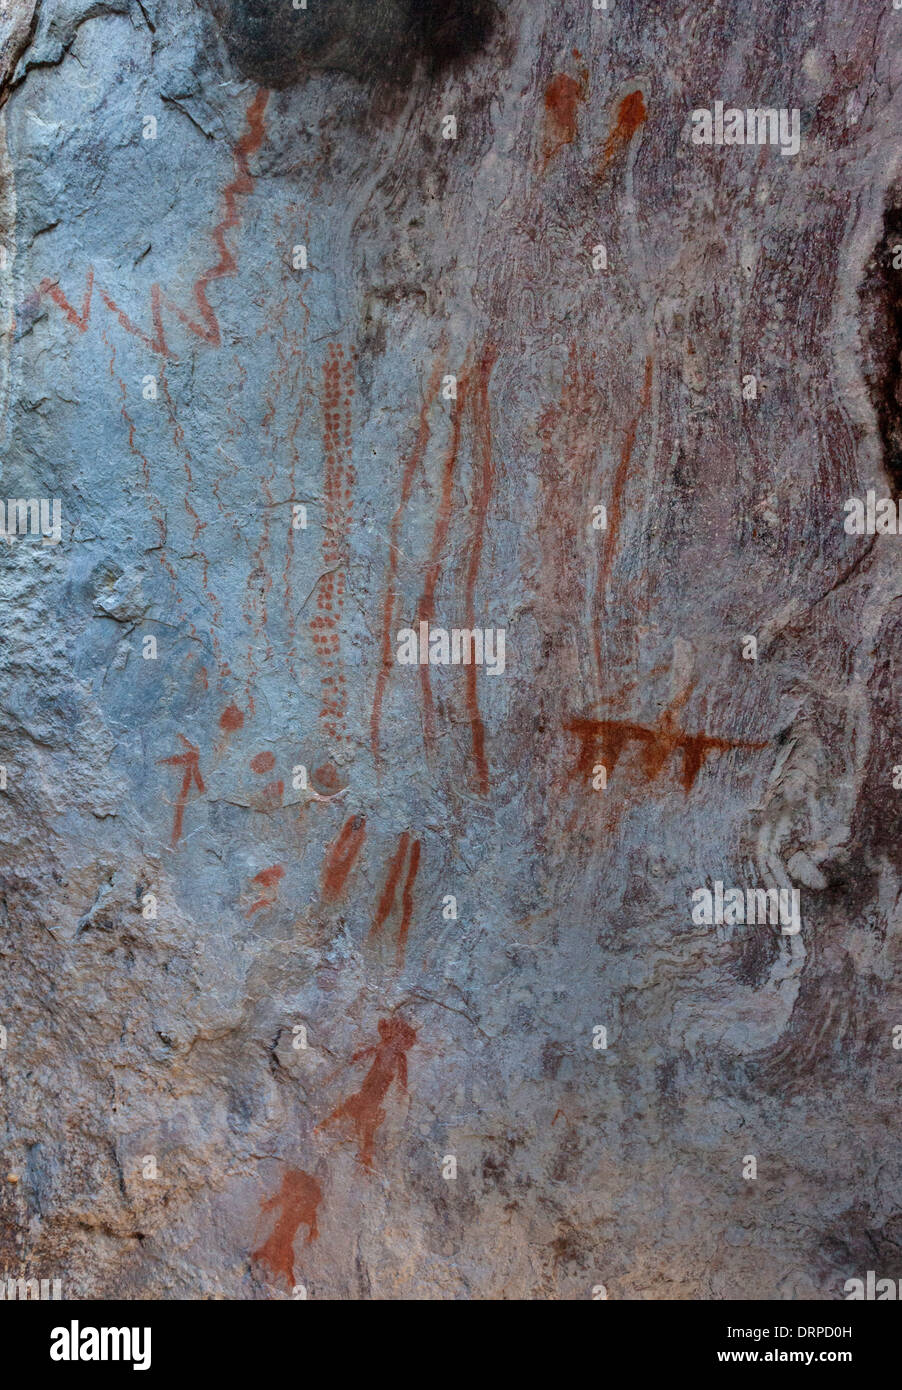 Ancient Indian red pictographs found in Portal Arizona. Stock Photo